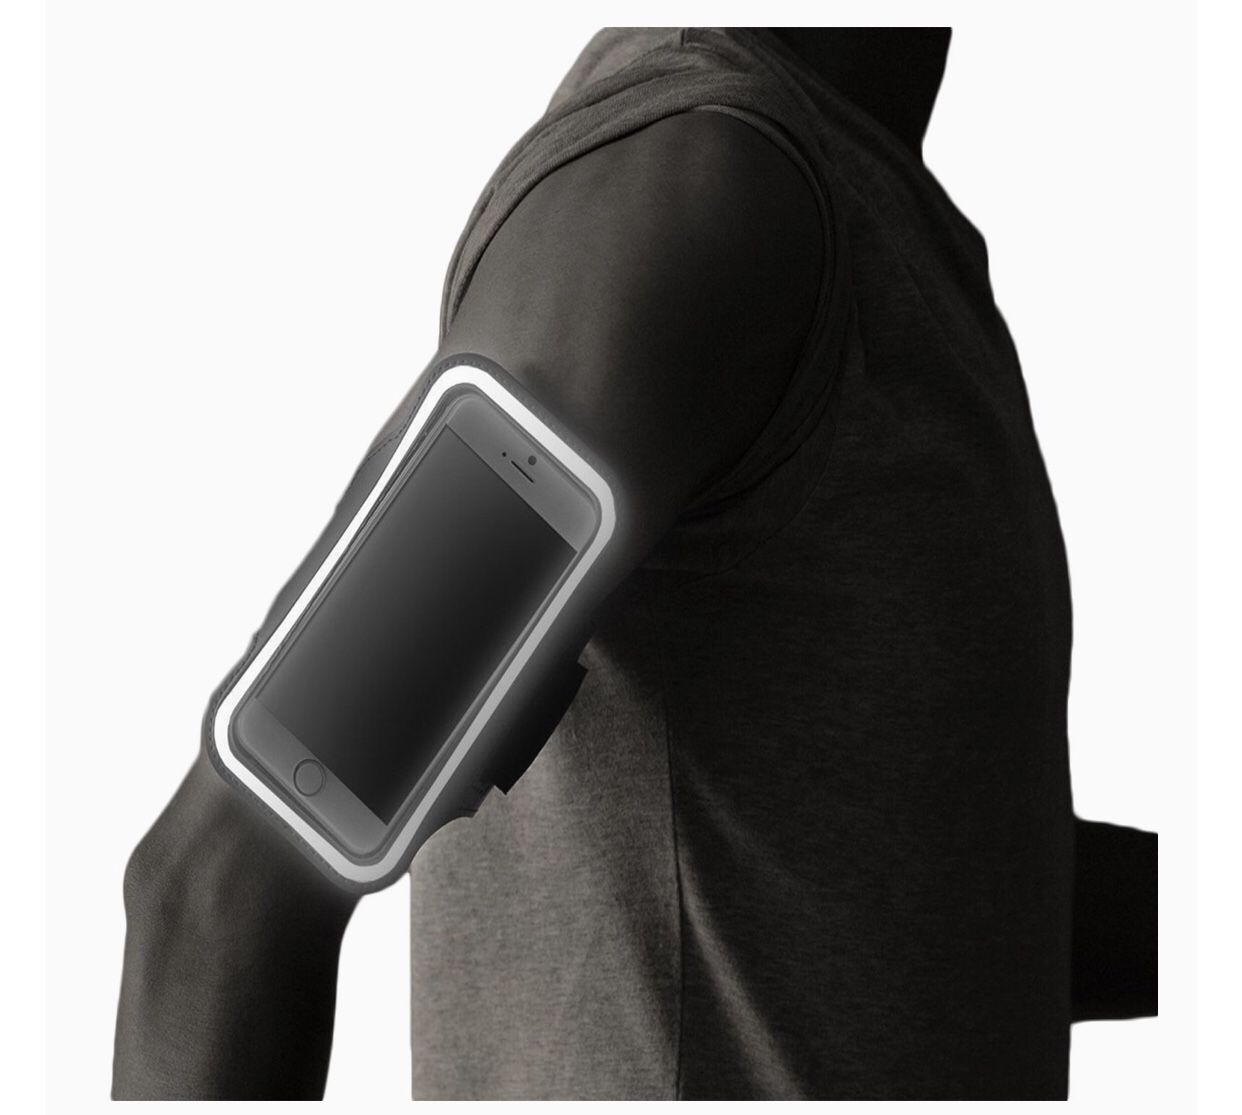 Premium iPhone 8/7/6s and SE Running Armband with Fingerprint ID Access. Sports Phone Arm Case Holder for Jogging, Gym Workouts